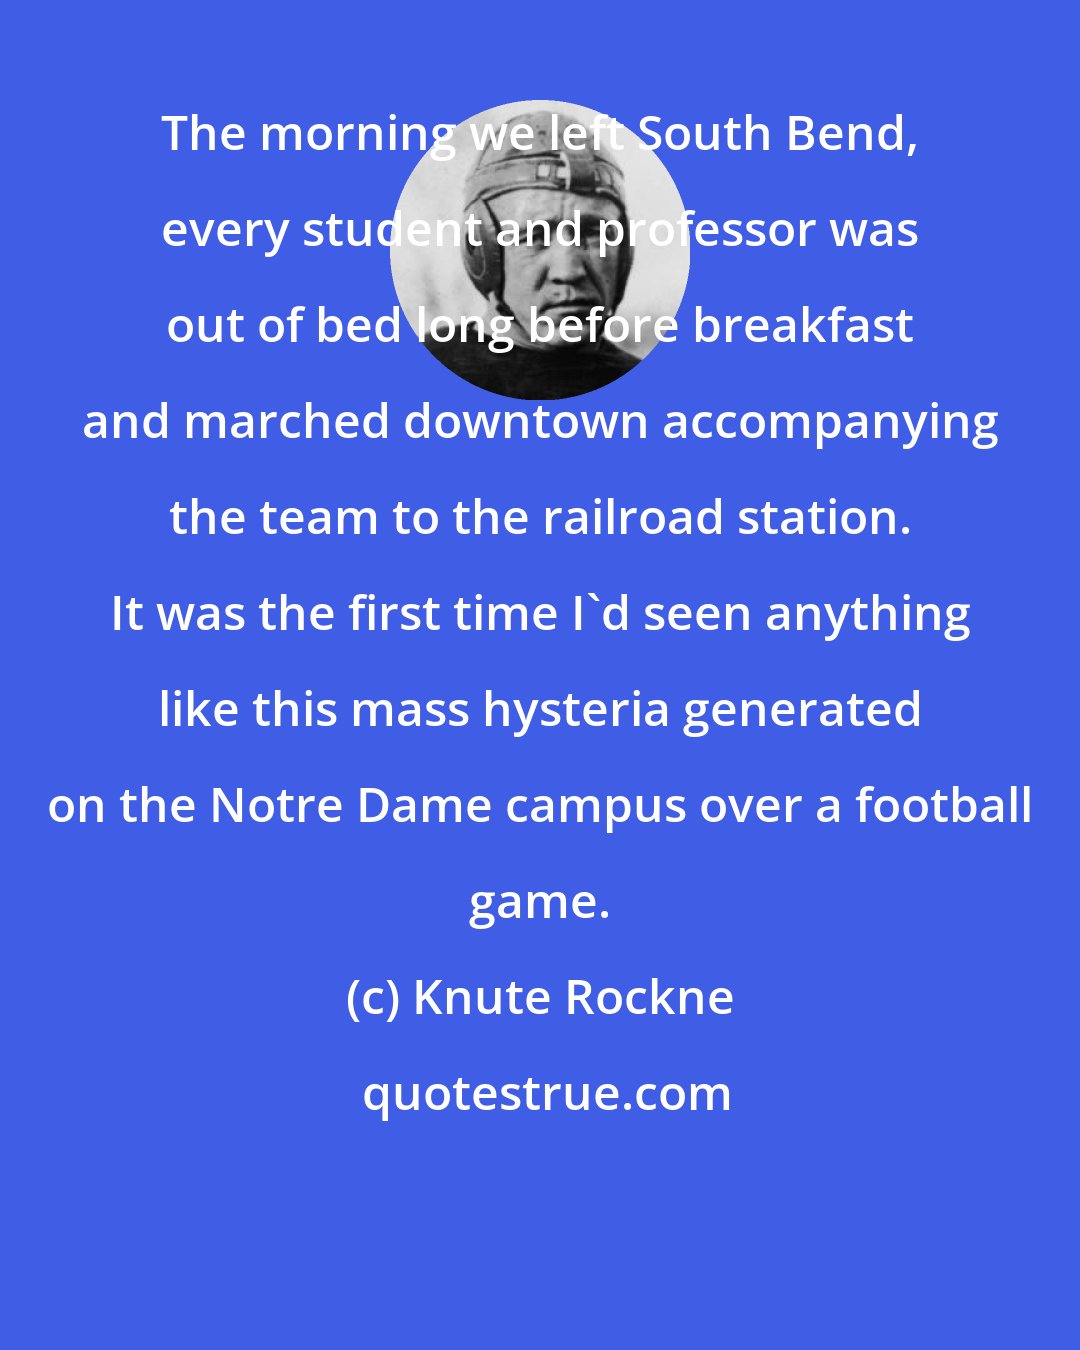 Knute Rockne: The morning we left South Bend, every student and professor was out of bed long before breakfast and marched downtown accompanying the team to the railroad station. It was the first time I'd seen anything like this mass hysteria generated on the Notre Dame campus over a football game.